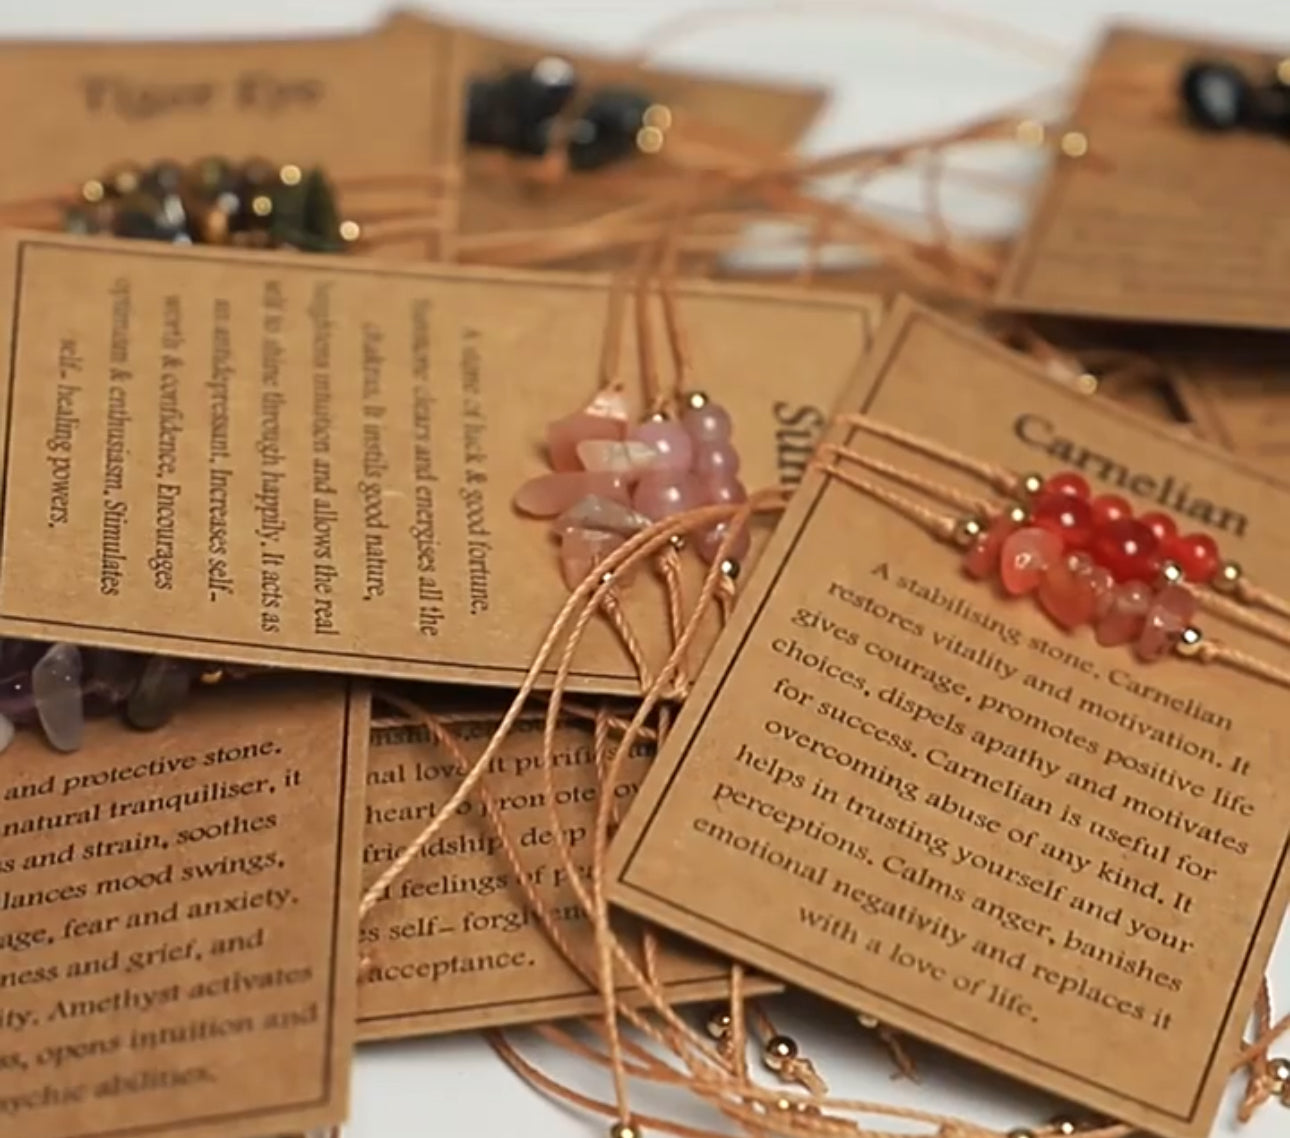 3—Piece Natural Stone Boho Style Bracelet with Meaning Card